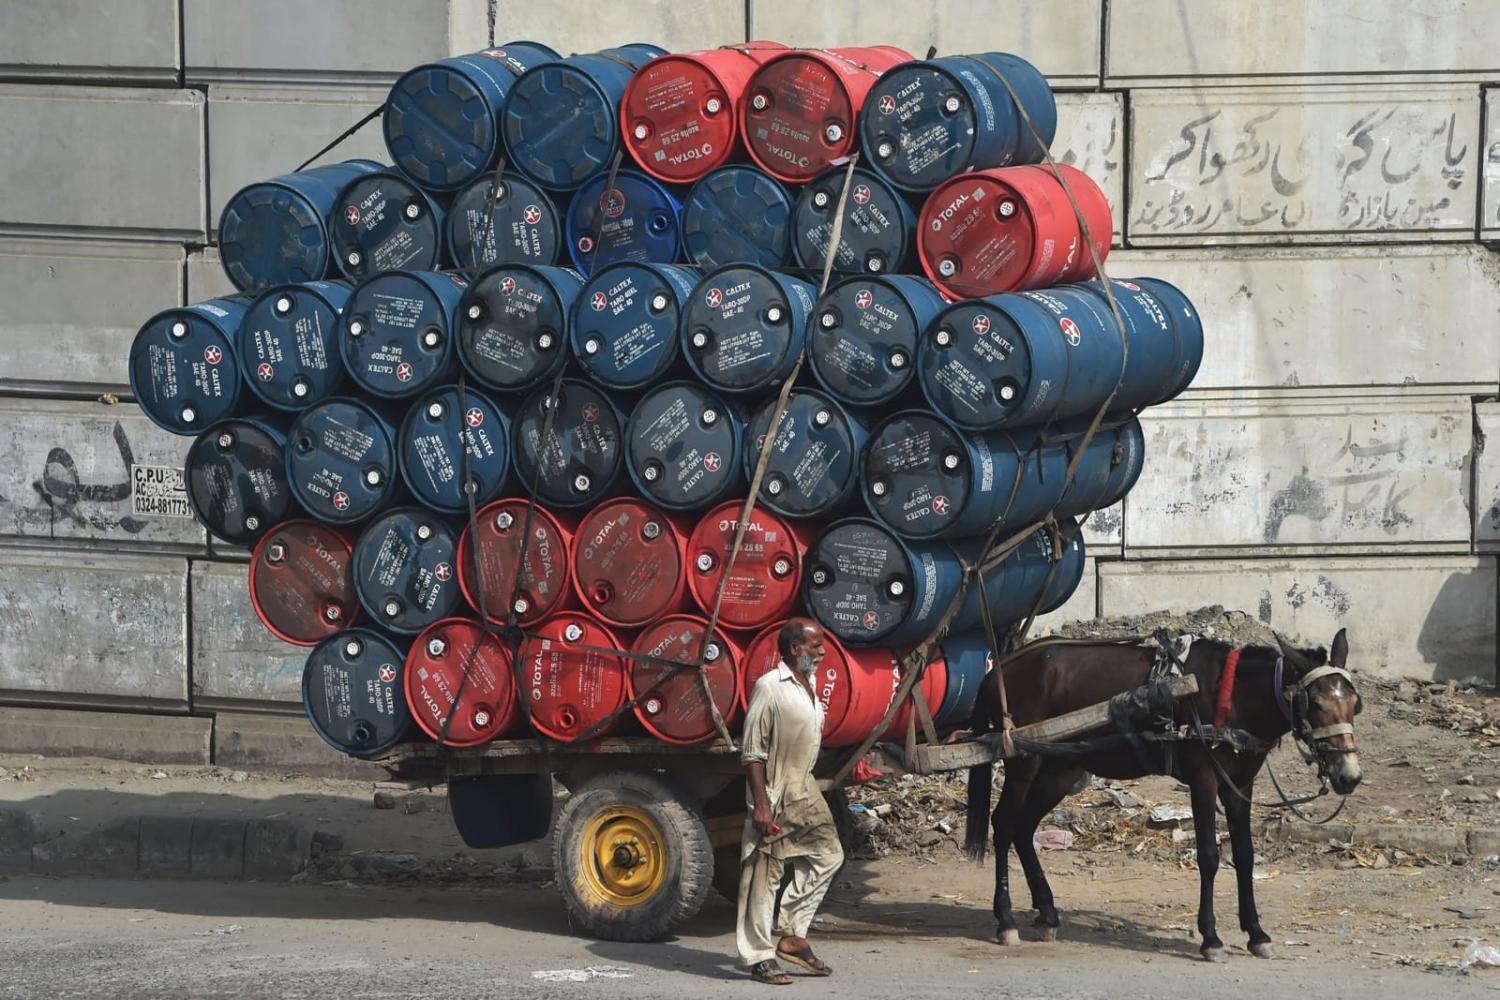 Transporting oil drums on a street in Lahore (Arif ALI/AFP via Getty Images)